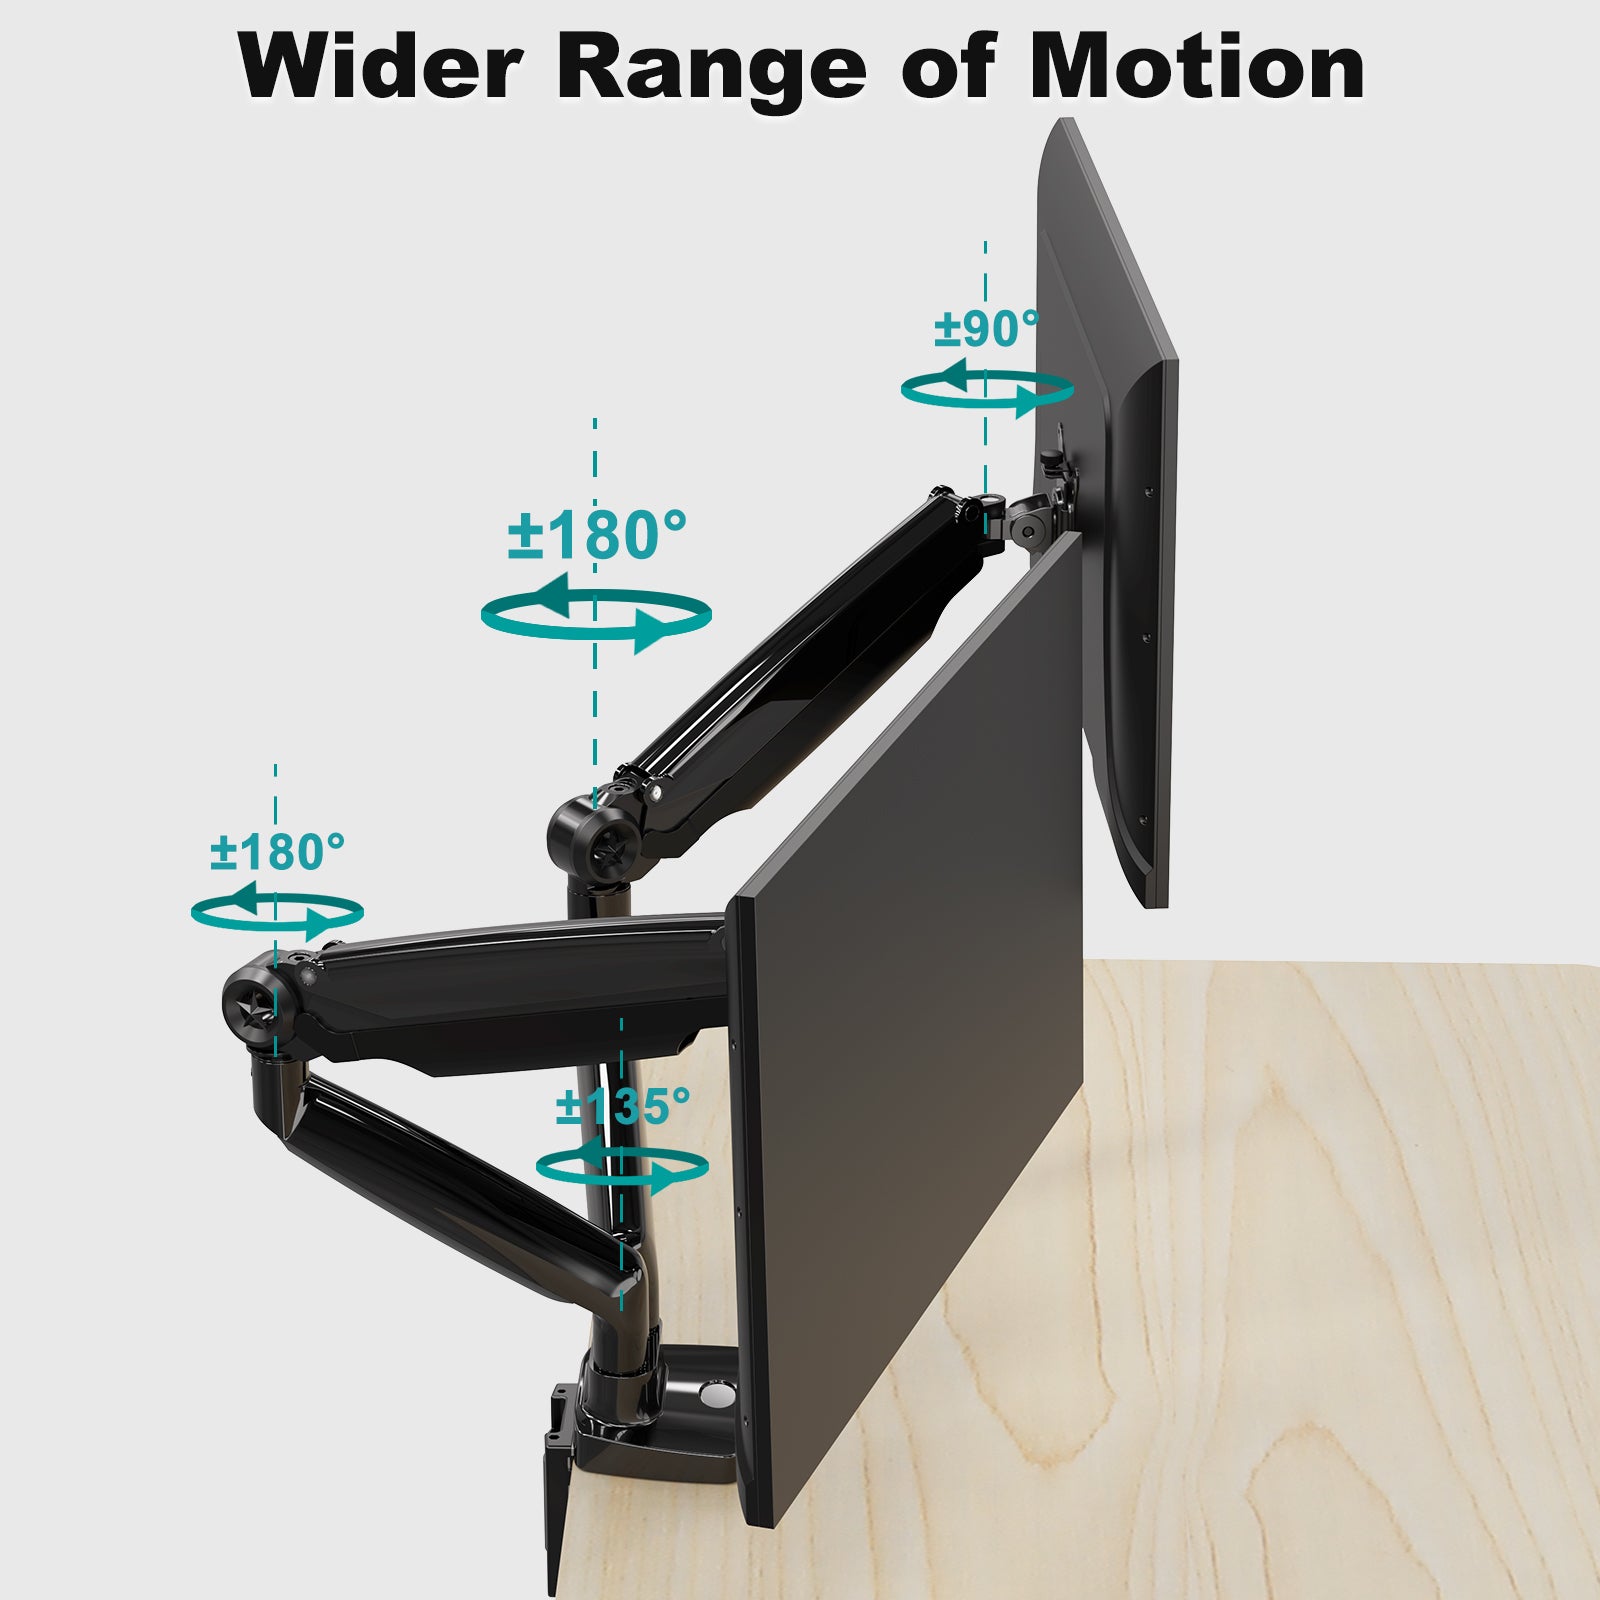 MOUNTUP Ultrawide Dual Monitor Desk Mount for Two Max 35 inch Monitors Wide Range of Motion